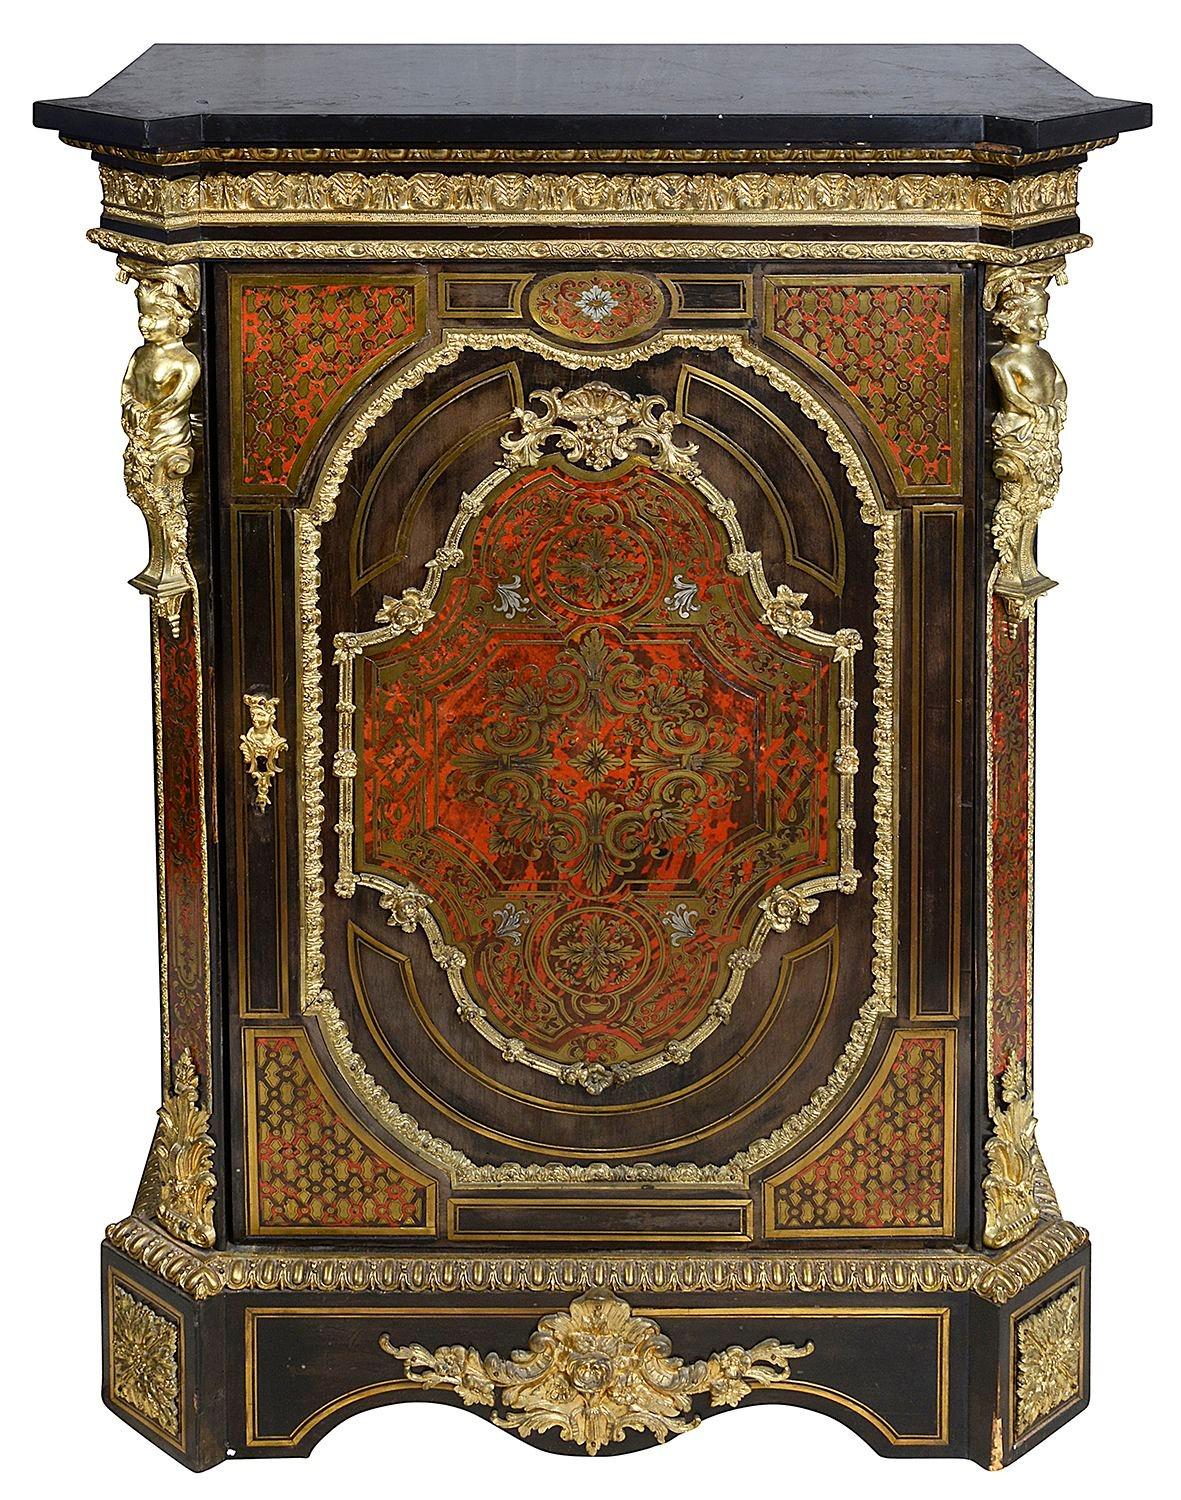 Pair of French 19th Century Boulle inlaid side cabinets, each with their original black Belgium marble tops, gilded classical ormolu mouldings and mounts, canted corners with classical monopodia mounts, red tortoiseshell inlaid panels to the single